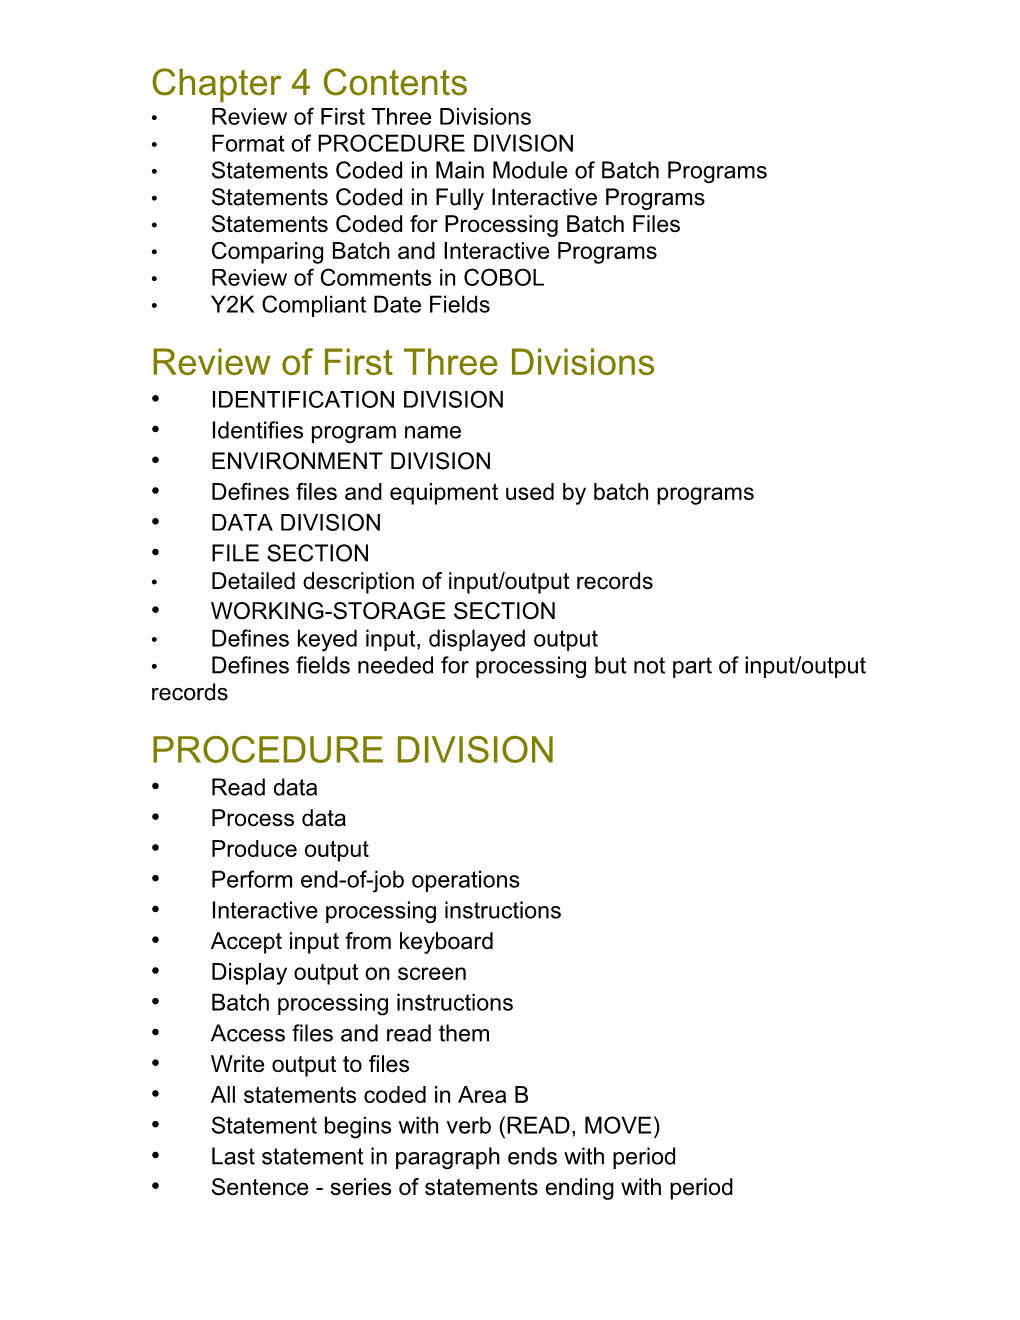 Review of First Three Divisions